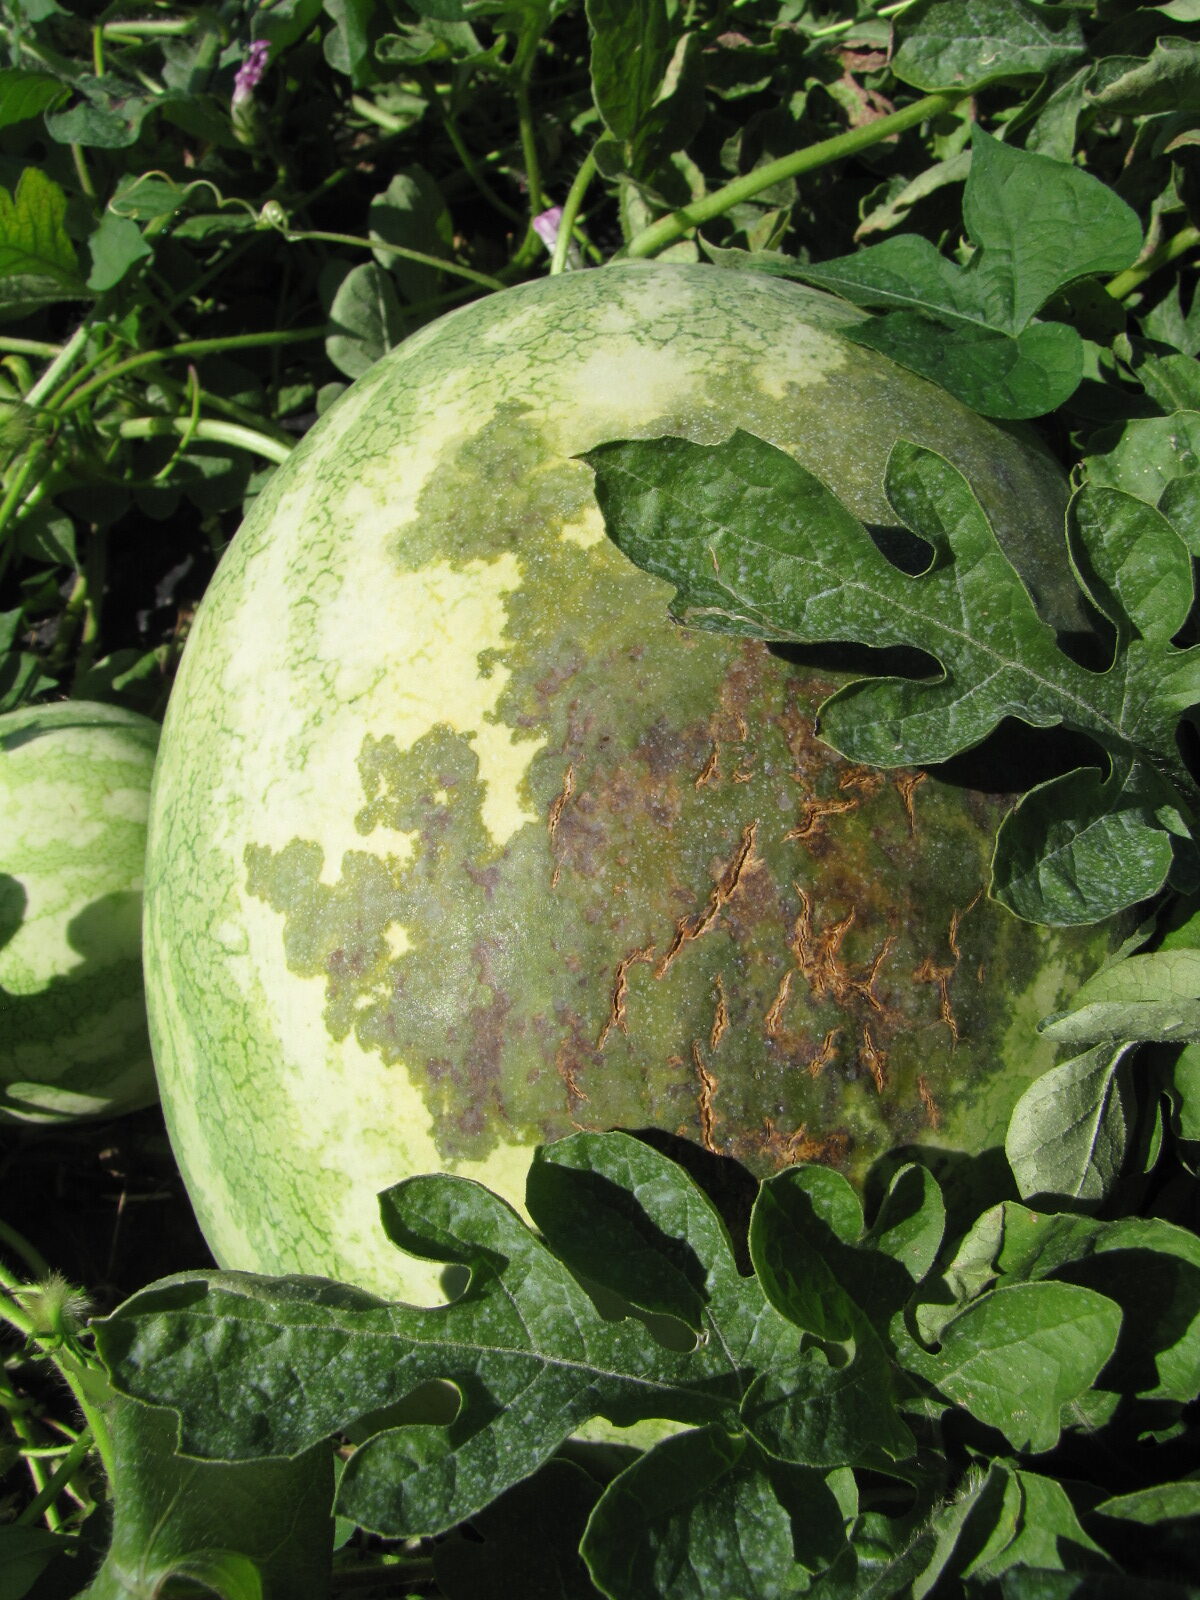 Figure 3. A large, spreading lesion due to bacterial fruit blotch is seen on the top of this watermelon. Note cracking of lesion.